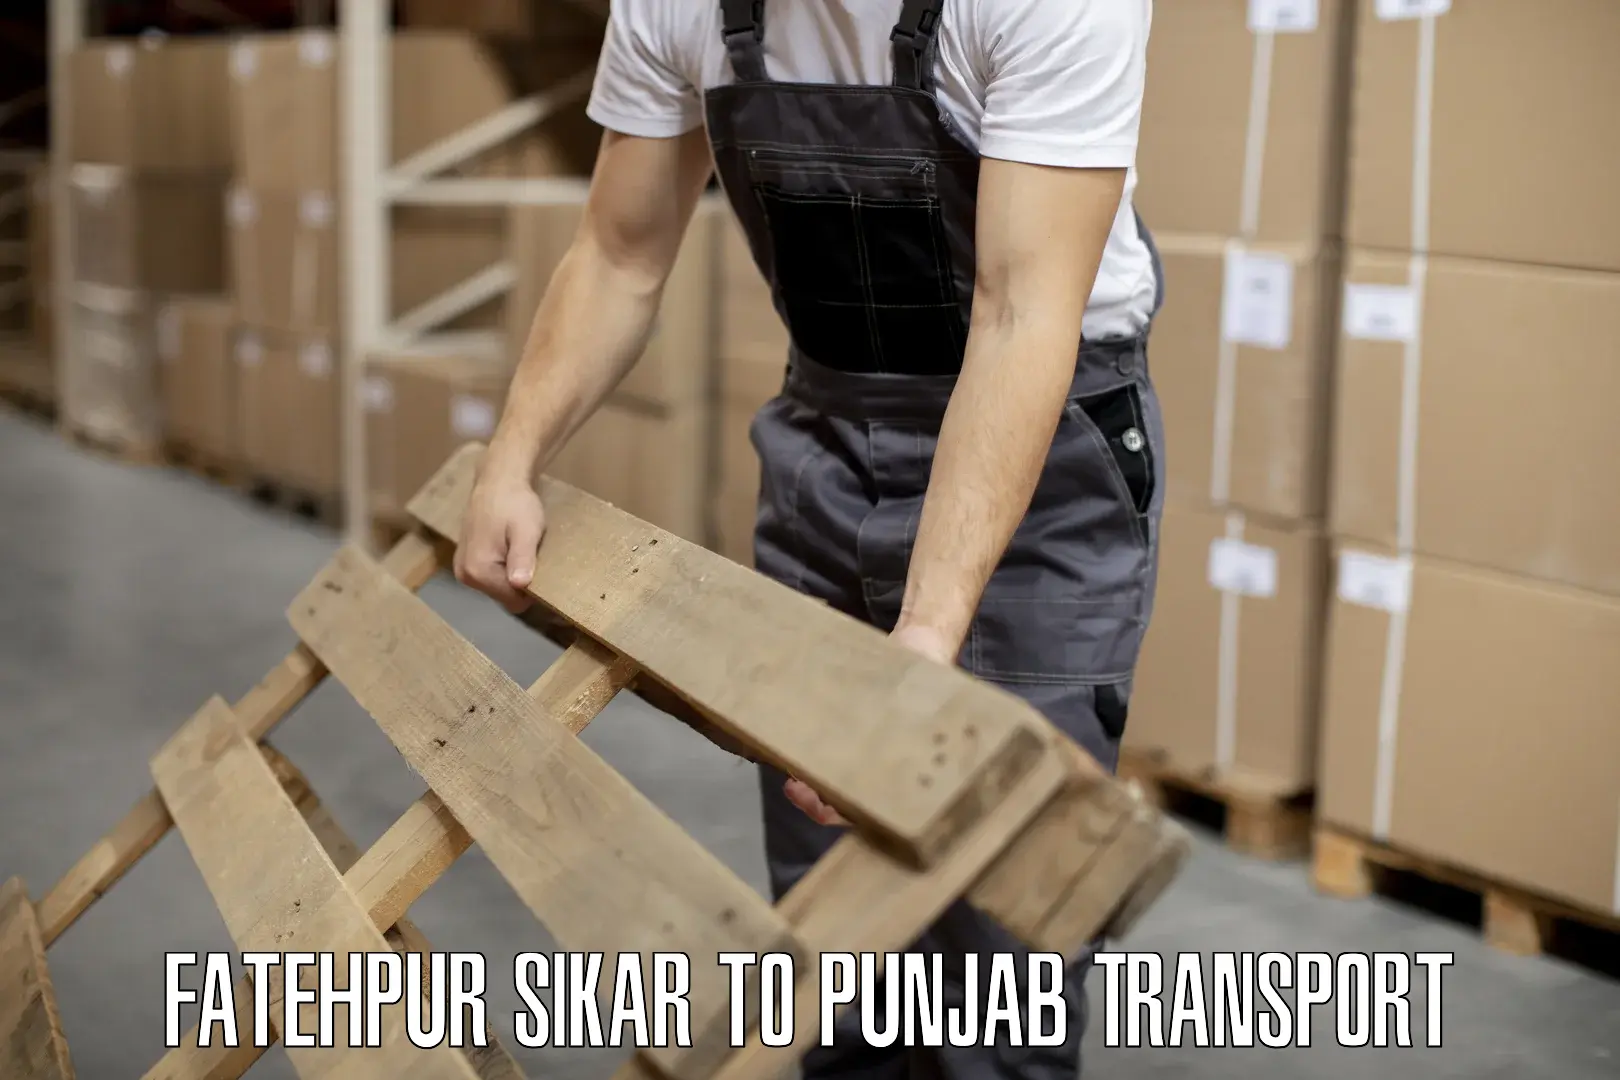 Container transport service Fatehpur Sikar to Tarsikka